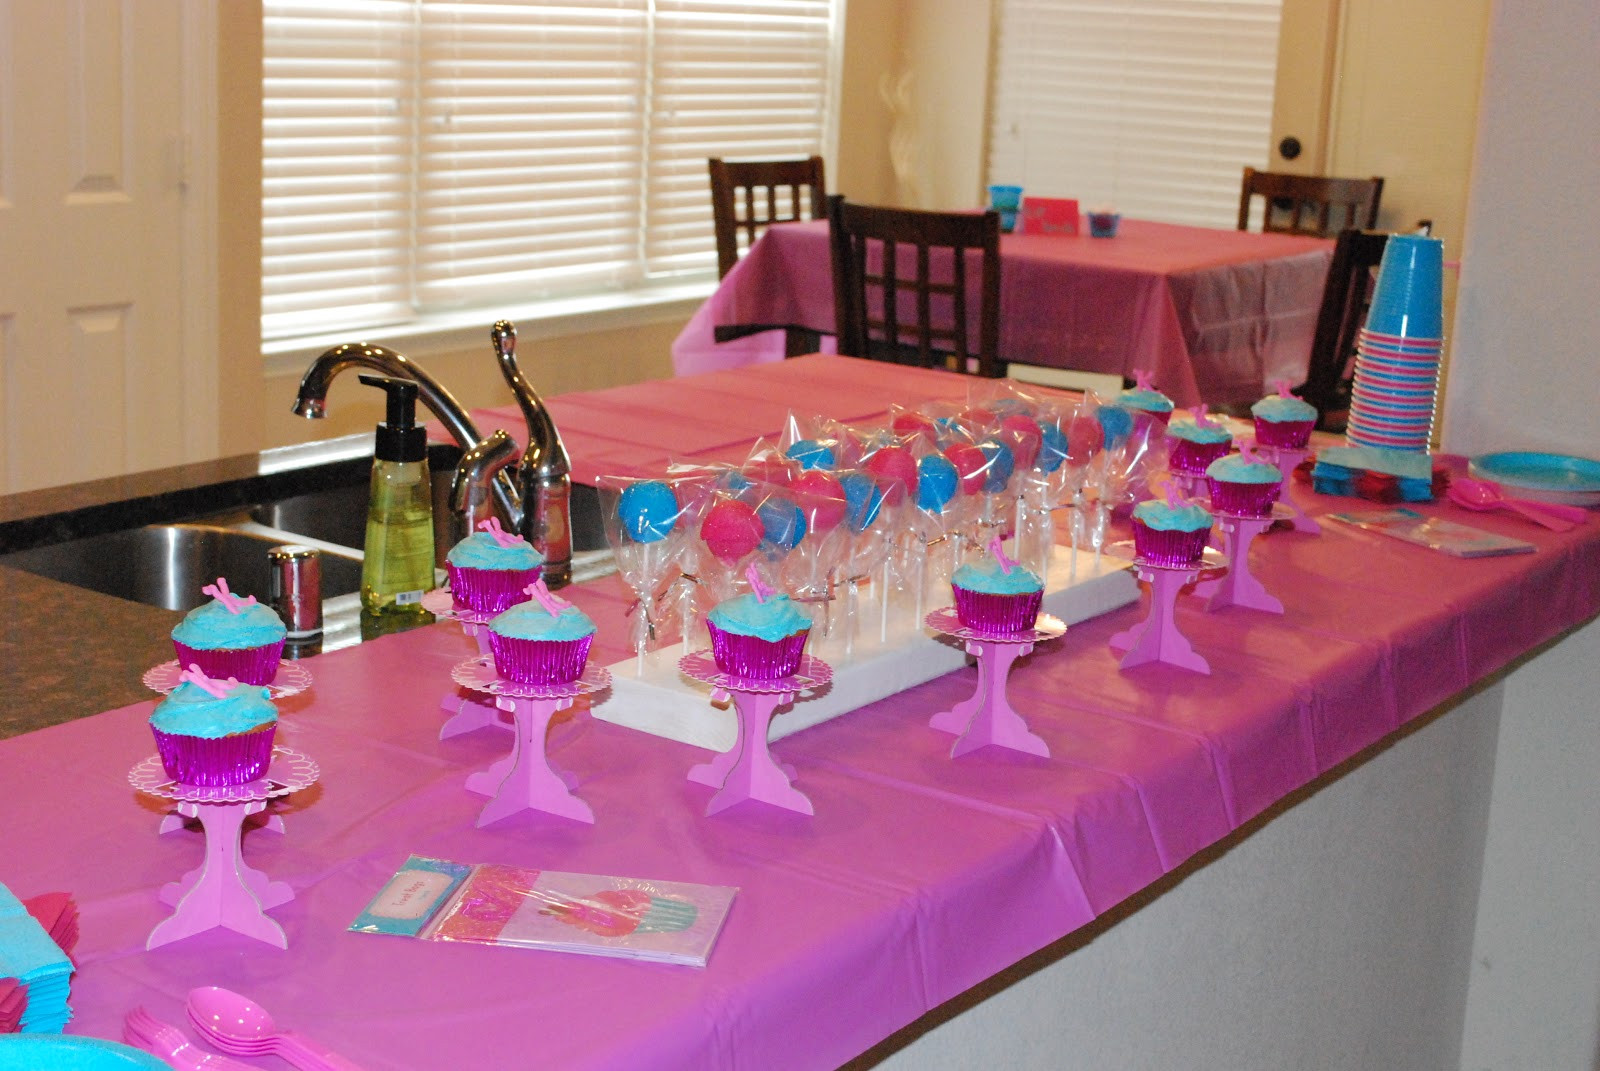 11 Year Old Girl Birthday Party
 The Simple Life SPArty Birthday Party for my 11 Year Old